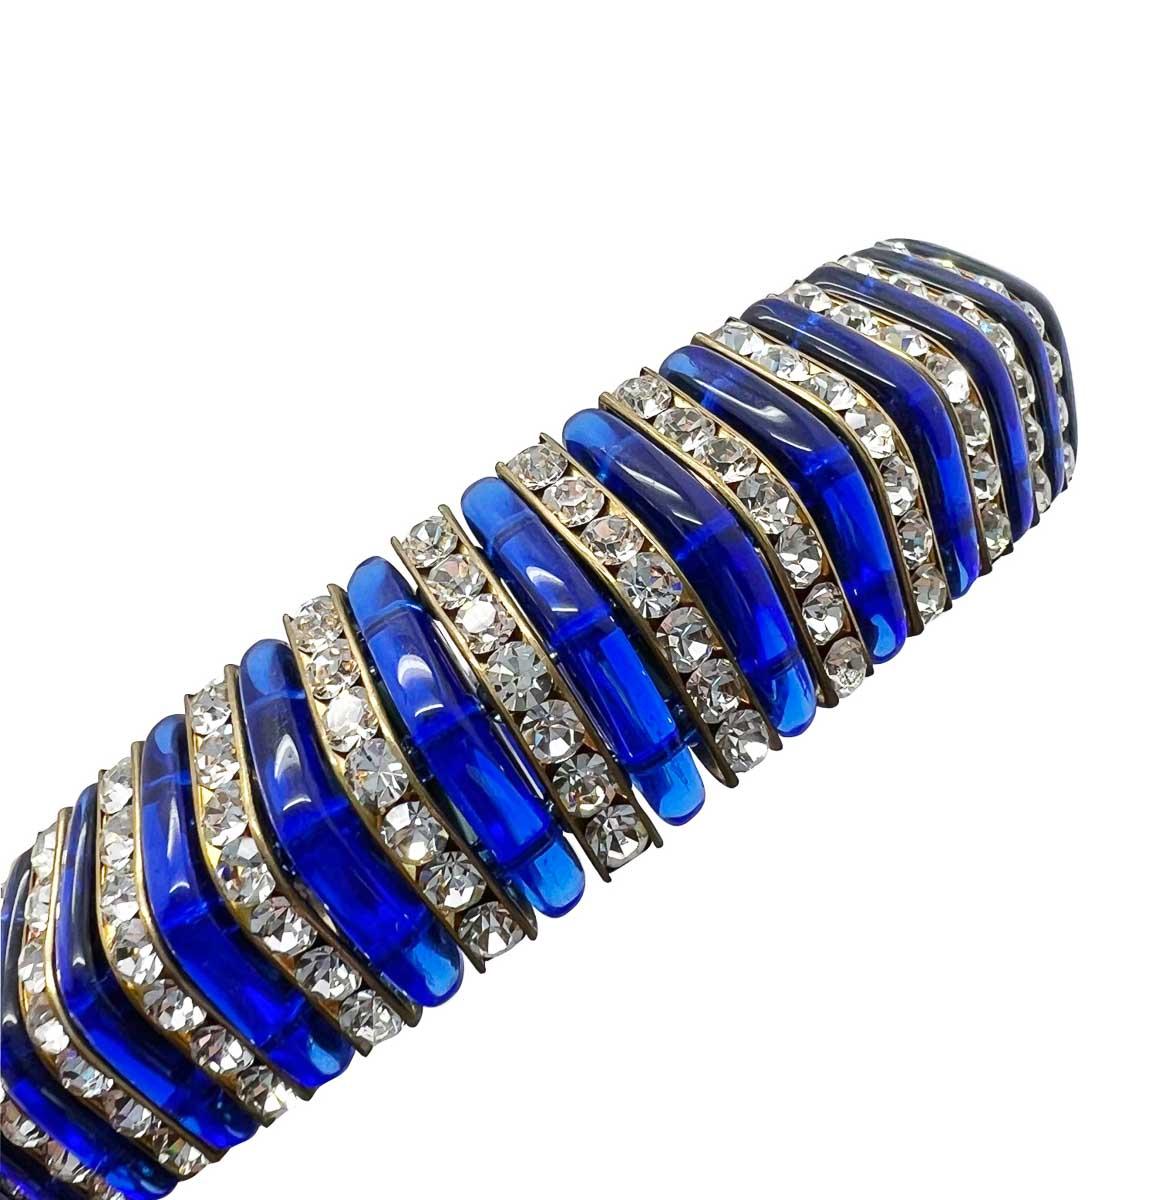 A rare and superb Vintage Electric Blue Glass Choker featuring incredible poured glass detail. Incorporating electrifying blue poured glass, alongside paste galleries in a pyramid effect design. The electric blue glass is deliciously vibrant and the